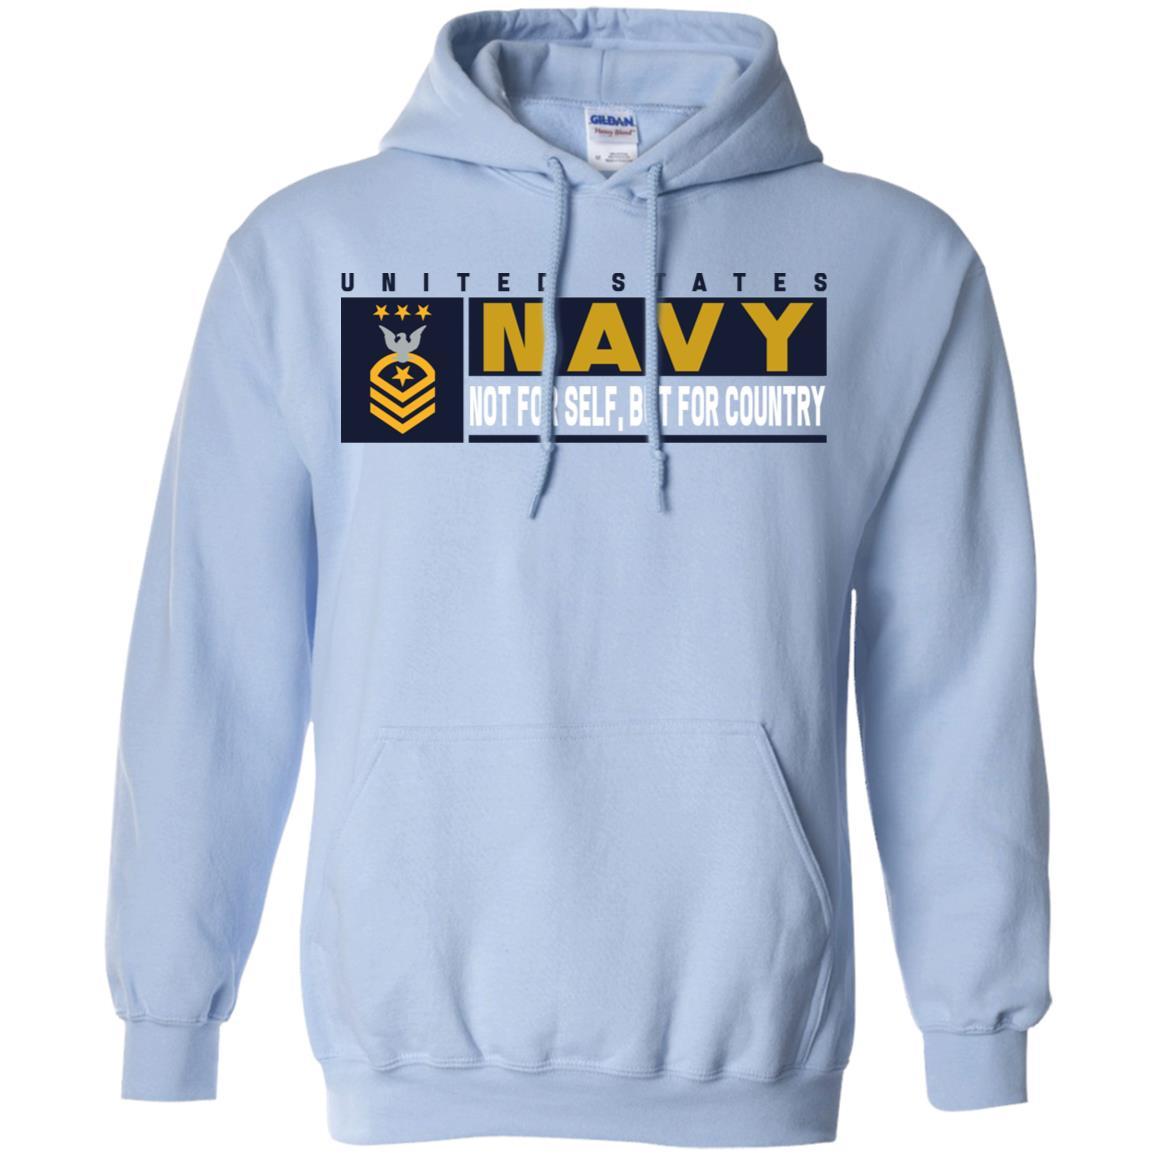 US Navy E-9 Master Chief Petty Officer Of The Navy E9 MCPON Not For Self, But For Country Long Sleeve - Pullover Hoodie-TShirt-Navy-Veterans Nation